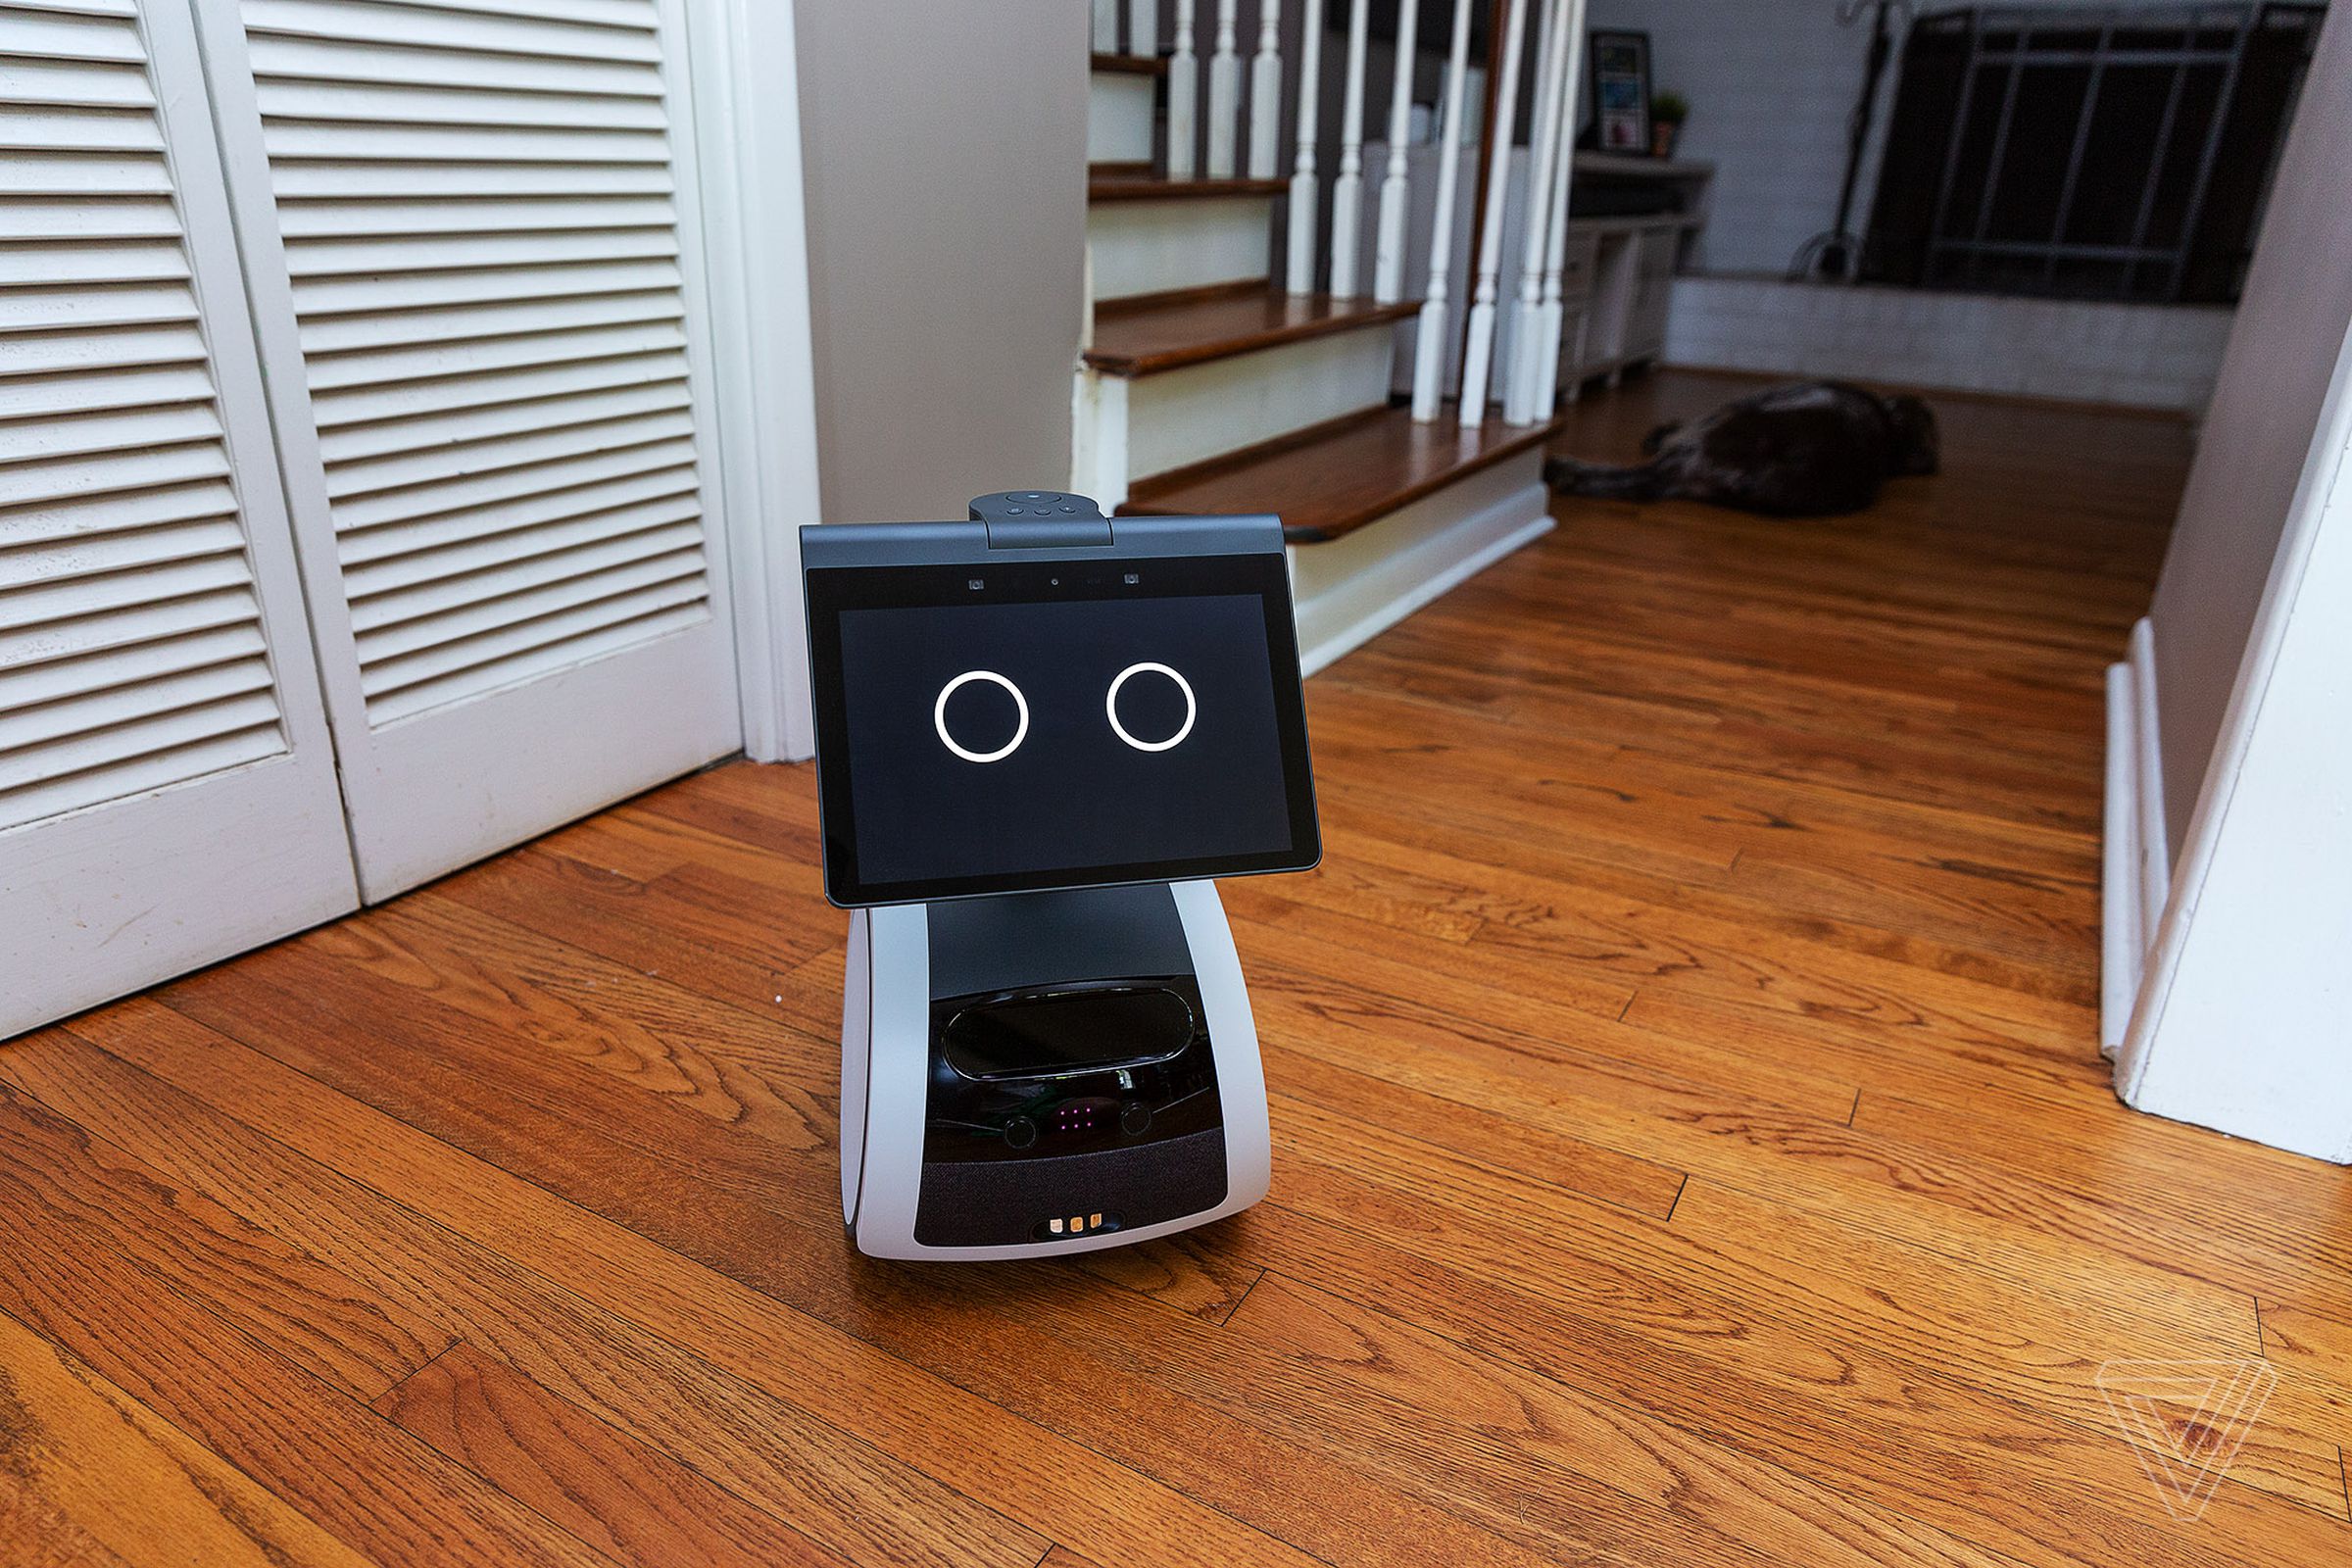 Amazon’s household robot, Astro, lived in my home for four weeks. 